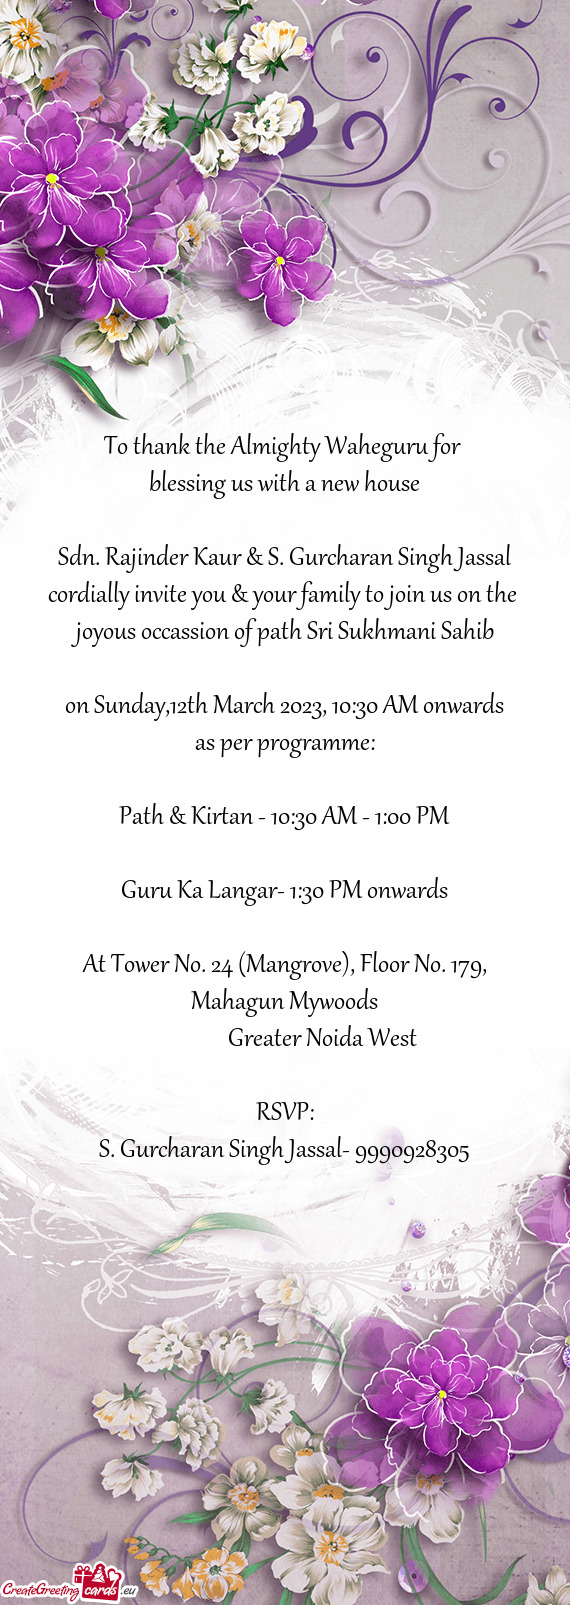 On Sunday,12th March 2023, 10:30 AM onwards